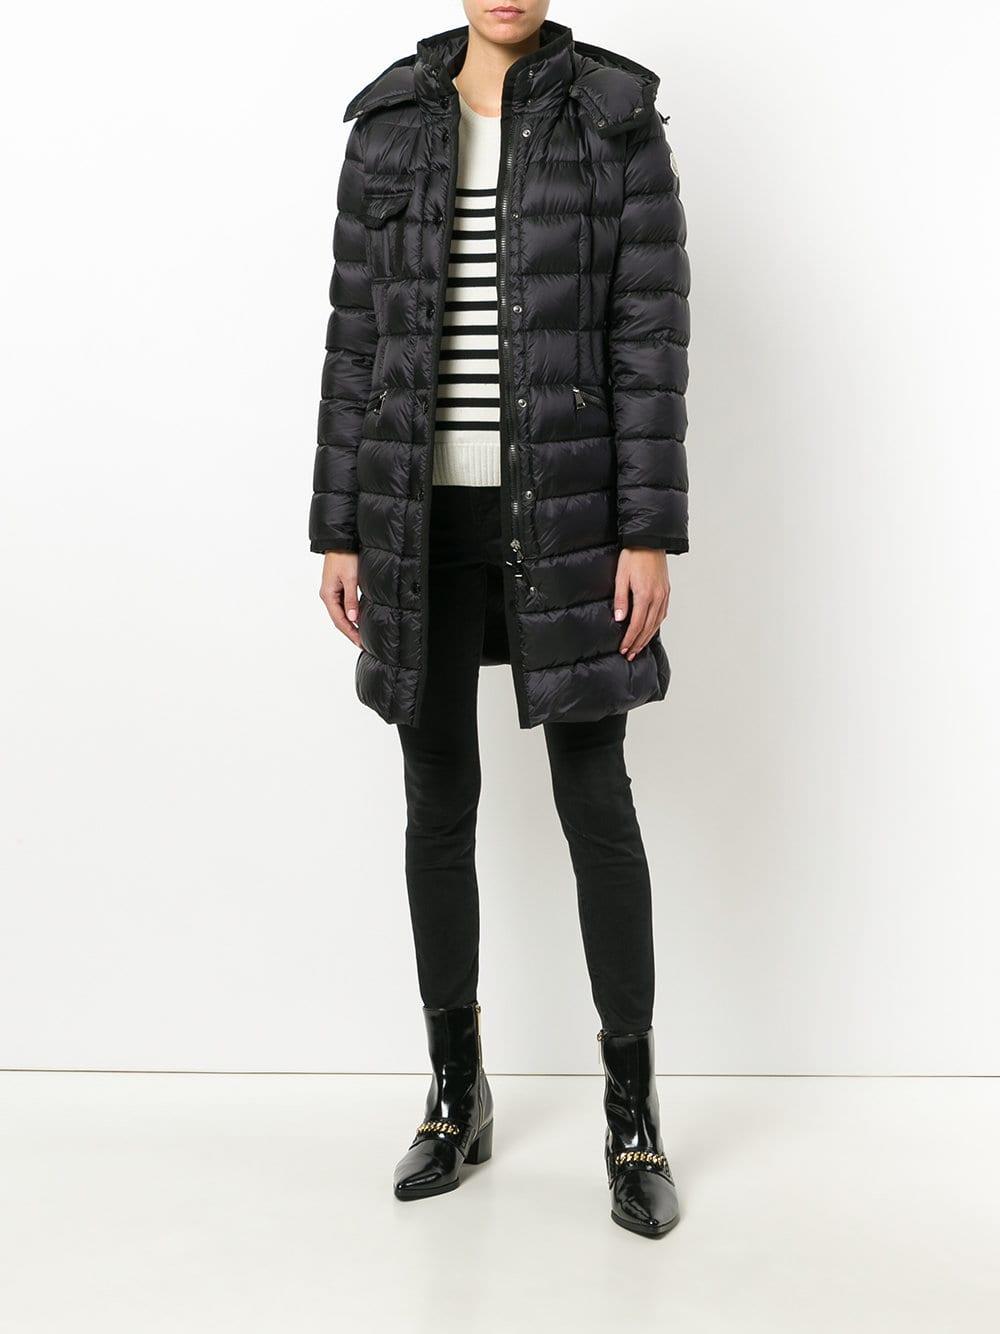 Moncler Hermine Giubbotto Black Long Puffer Coat Mitchell Stores